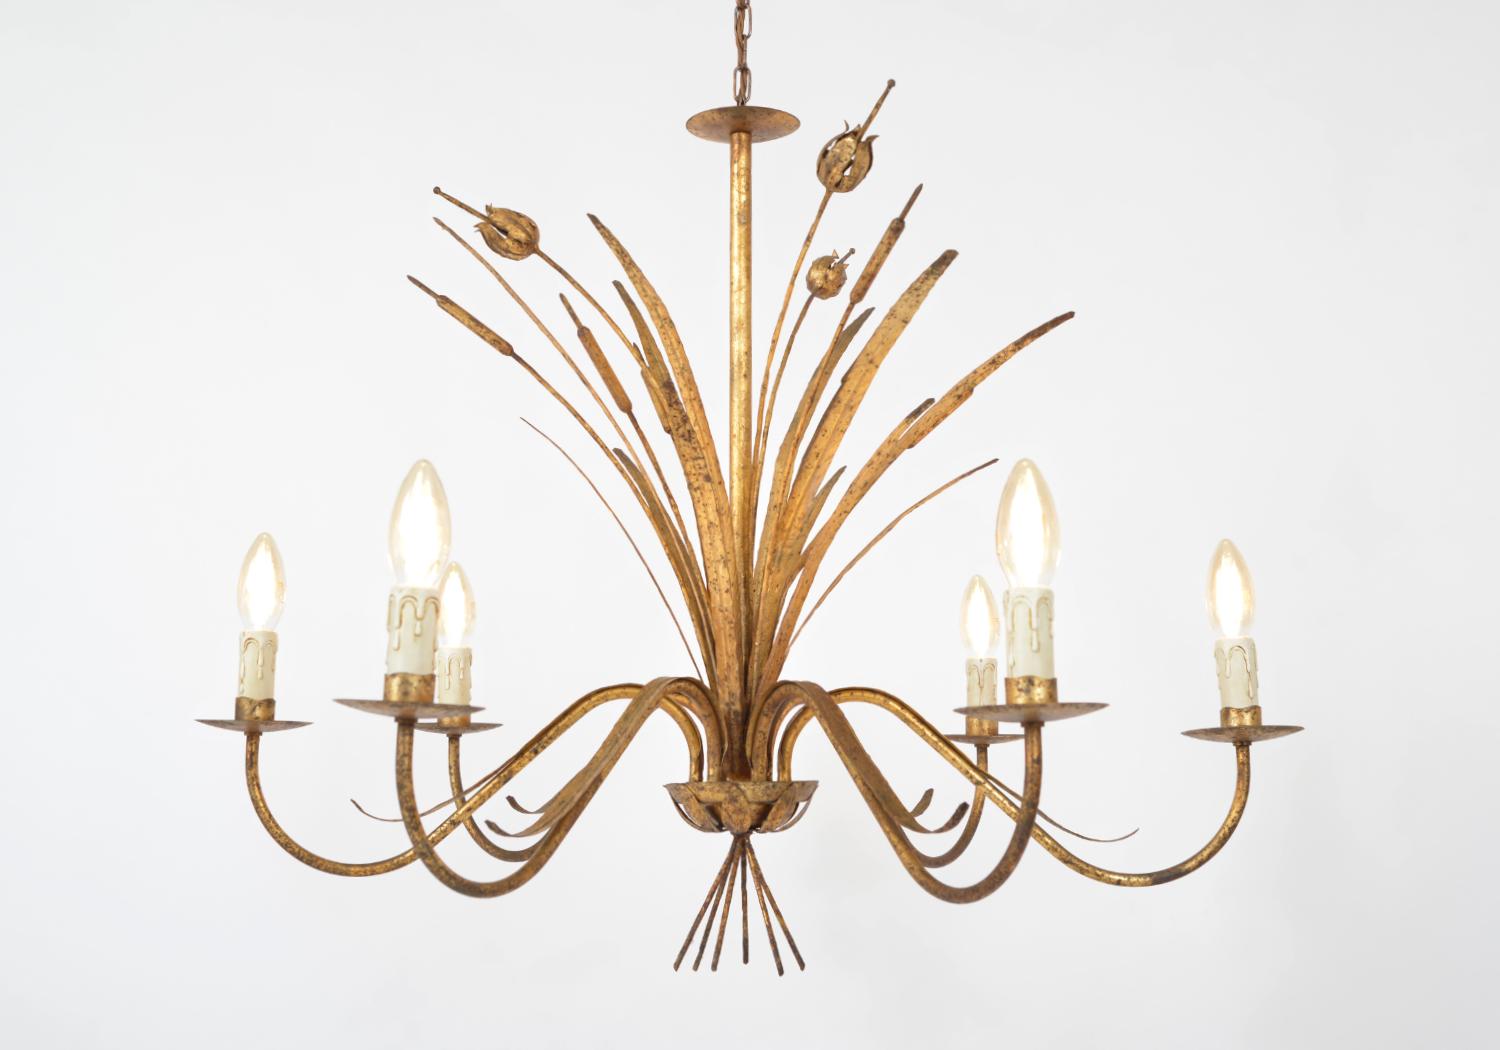 This stylish and elegant mid 20th century Toleware bulrush chandelier has a wonderful patina, and the gilt metal sparkles beautifully when lit. Hanging from its original scalloped ceiling rose, the chain extends to a gilt metal rod, which is